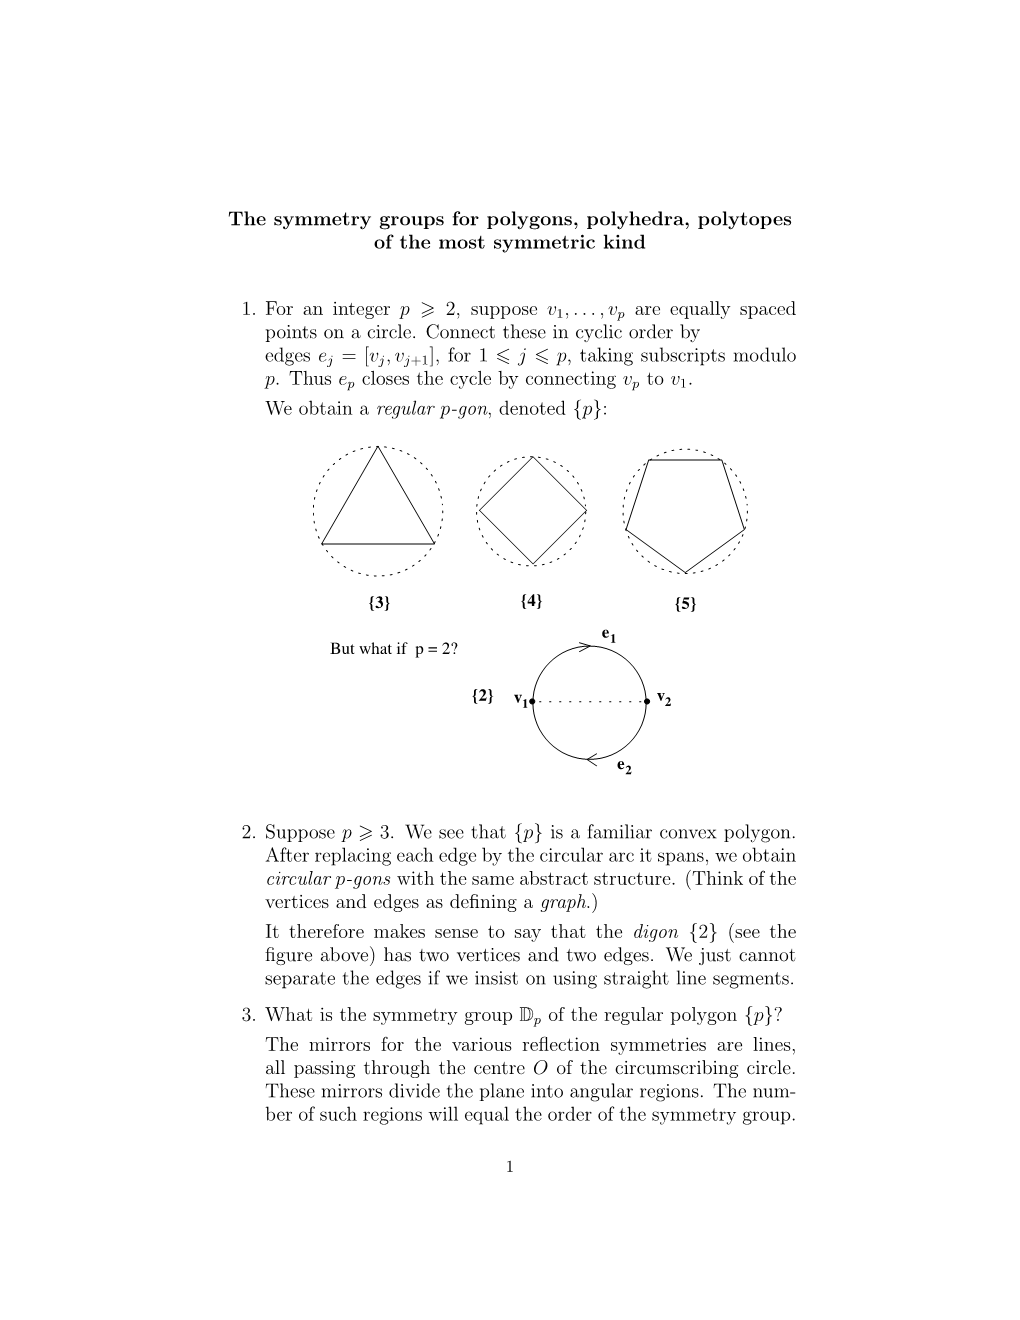 The Symmetry Groups for Polygons, Polyhedra, Polytopes of the Most Symmetric Kind 1. for an Integer P 2, Suppose V 1,...,Vp